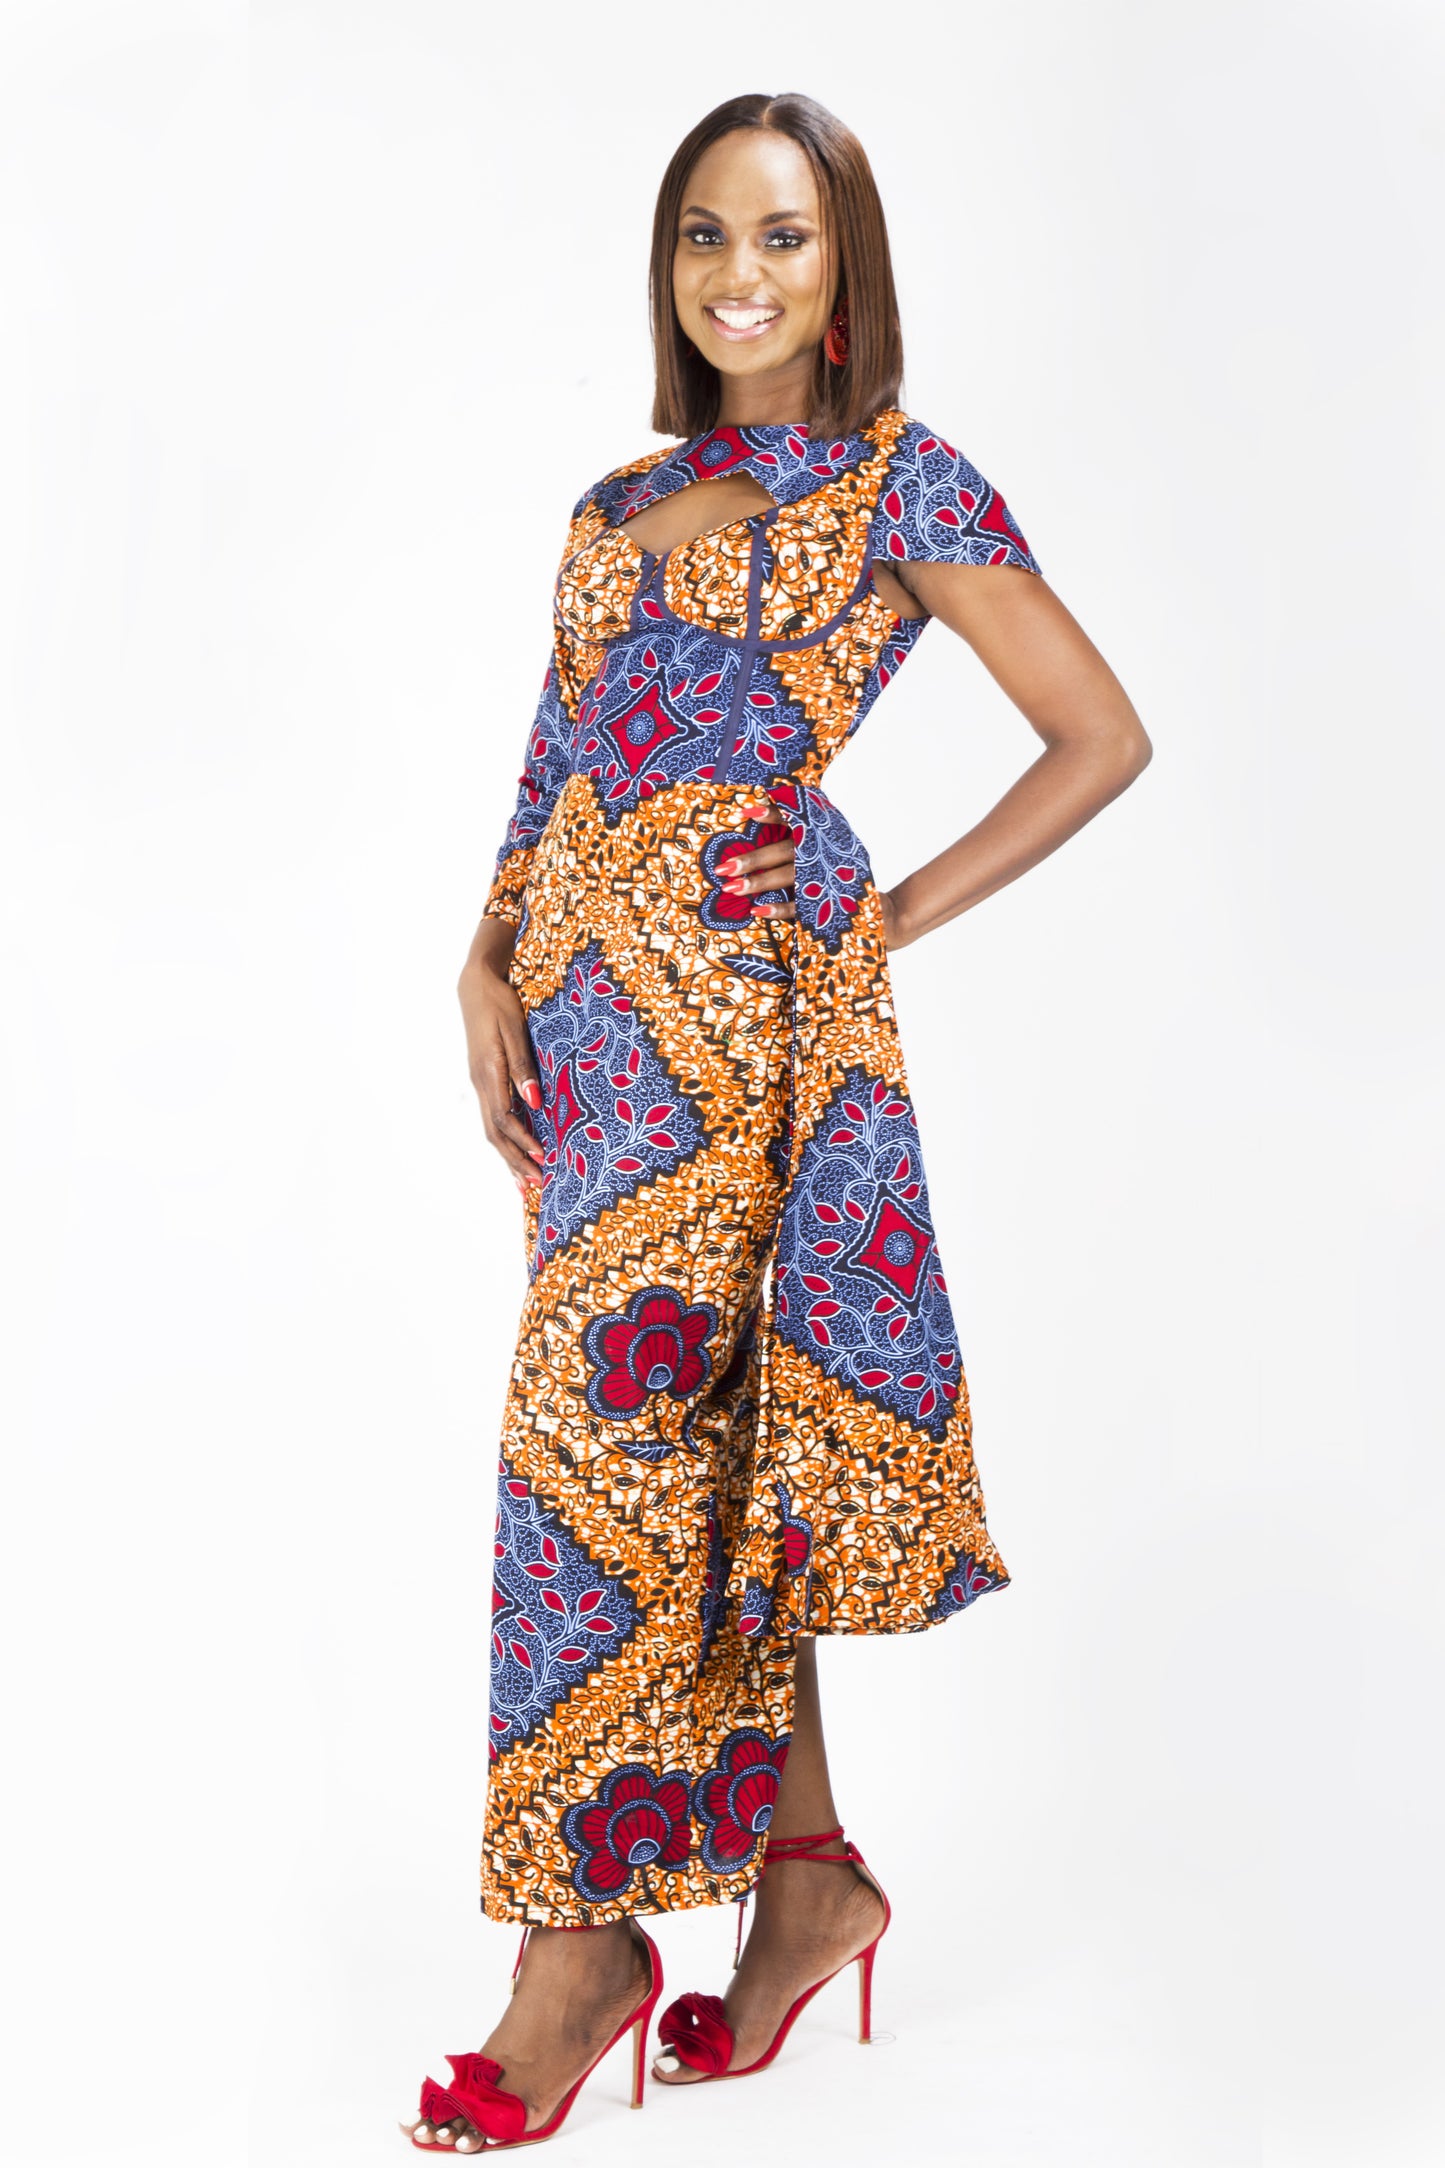 BROWN BLUE AFRICAN ANKARA PRINT PLUS SIZE CLOTHING PARTY DRESS